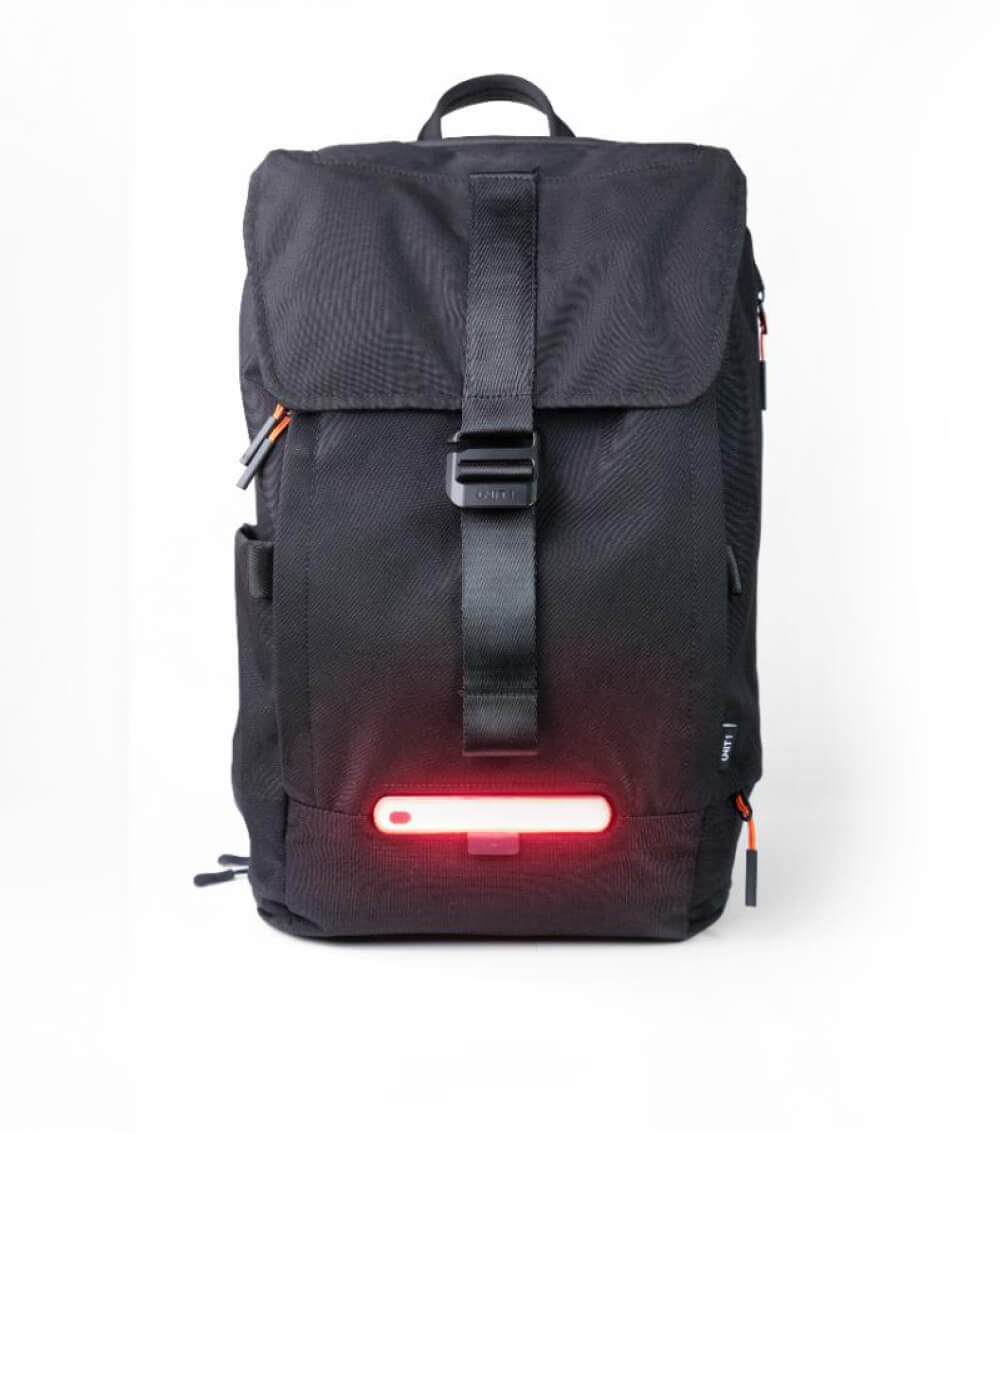 TORCH backpack with lights unisex black | UNIT 1